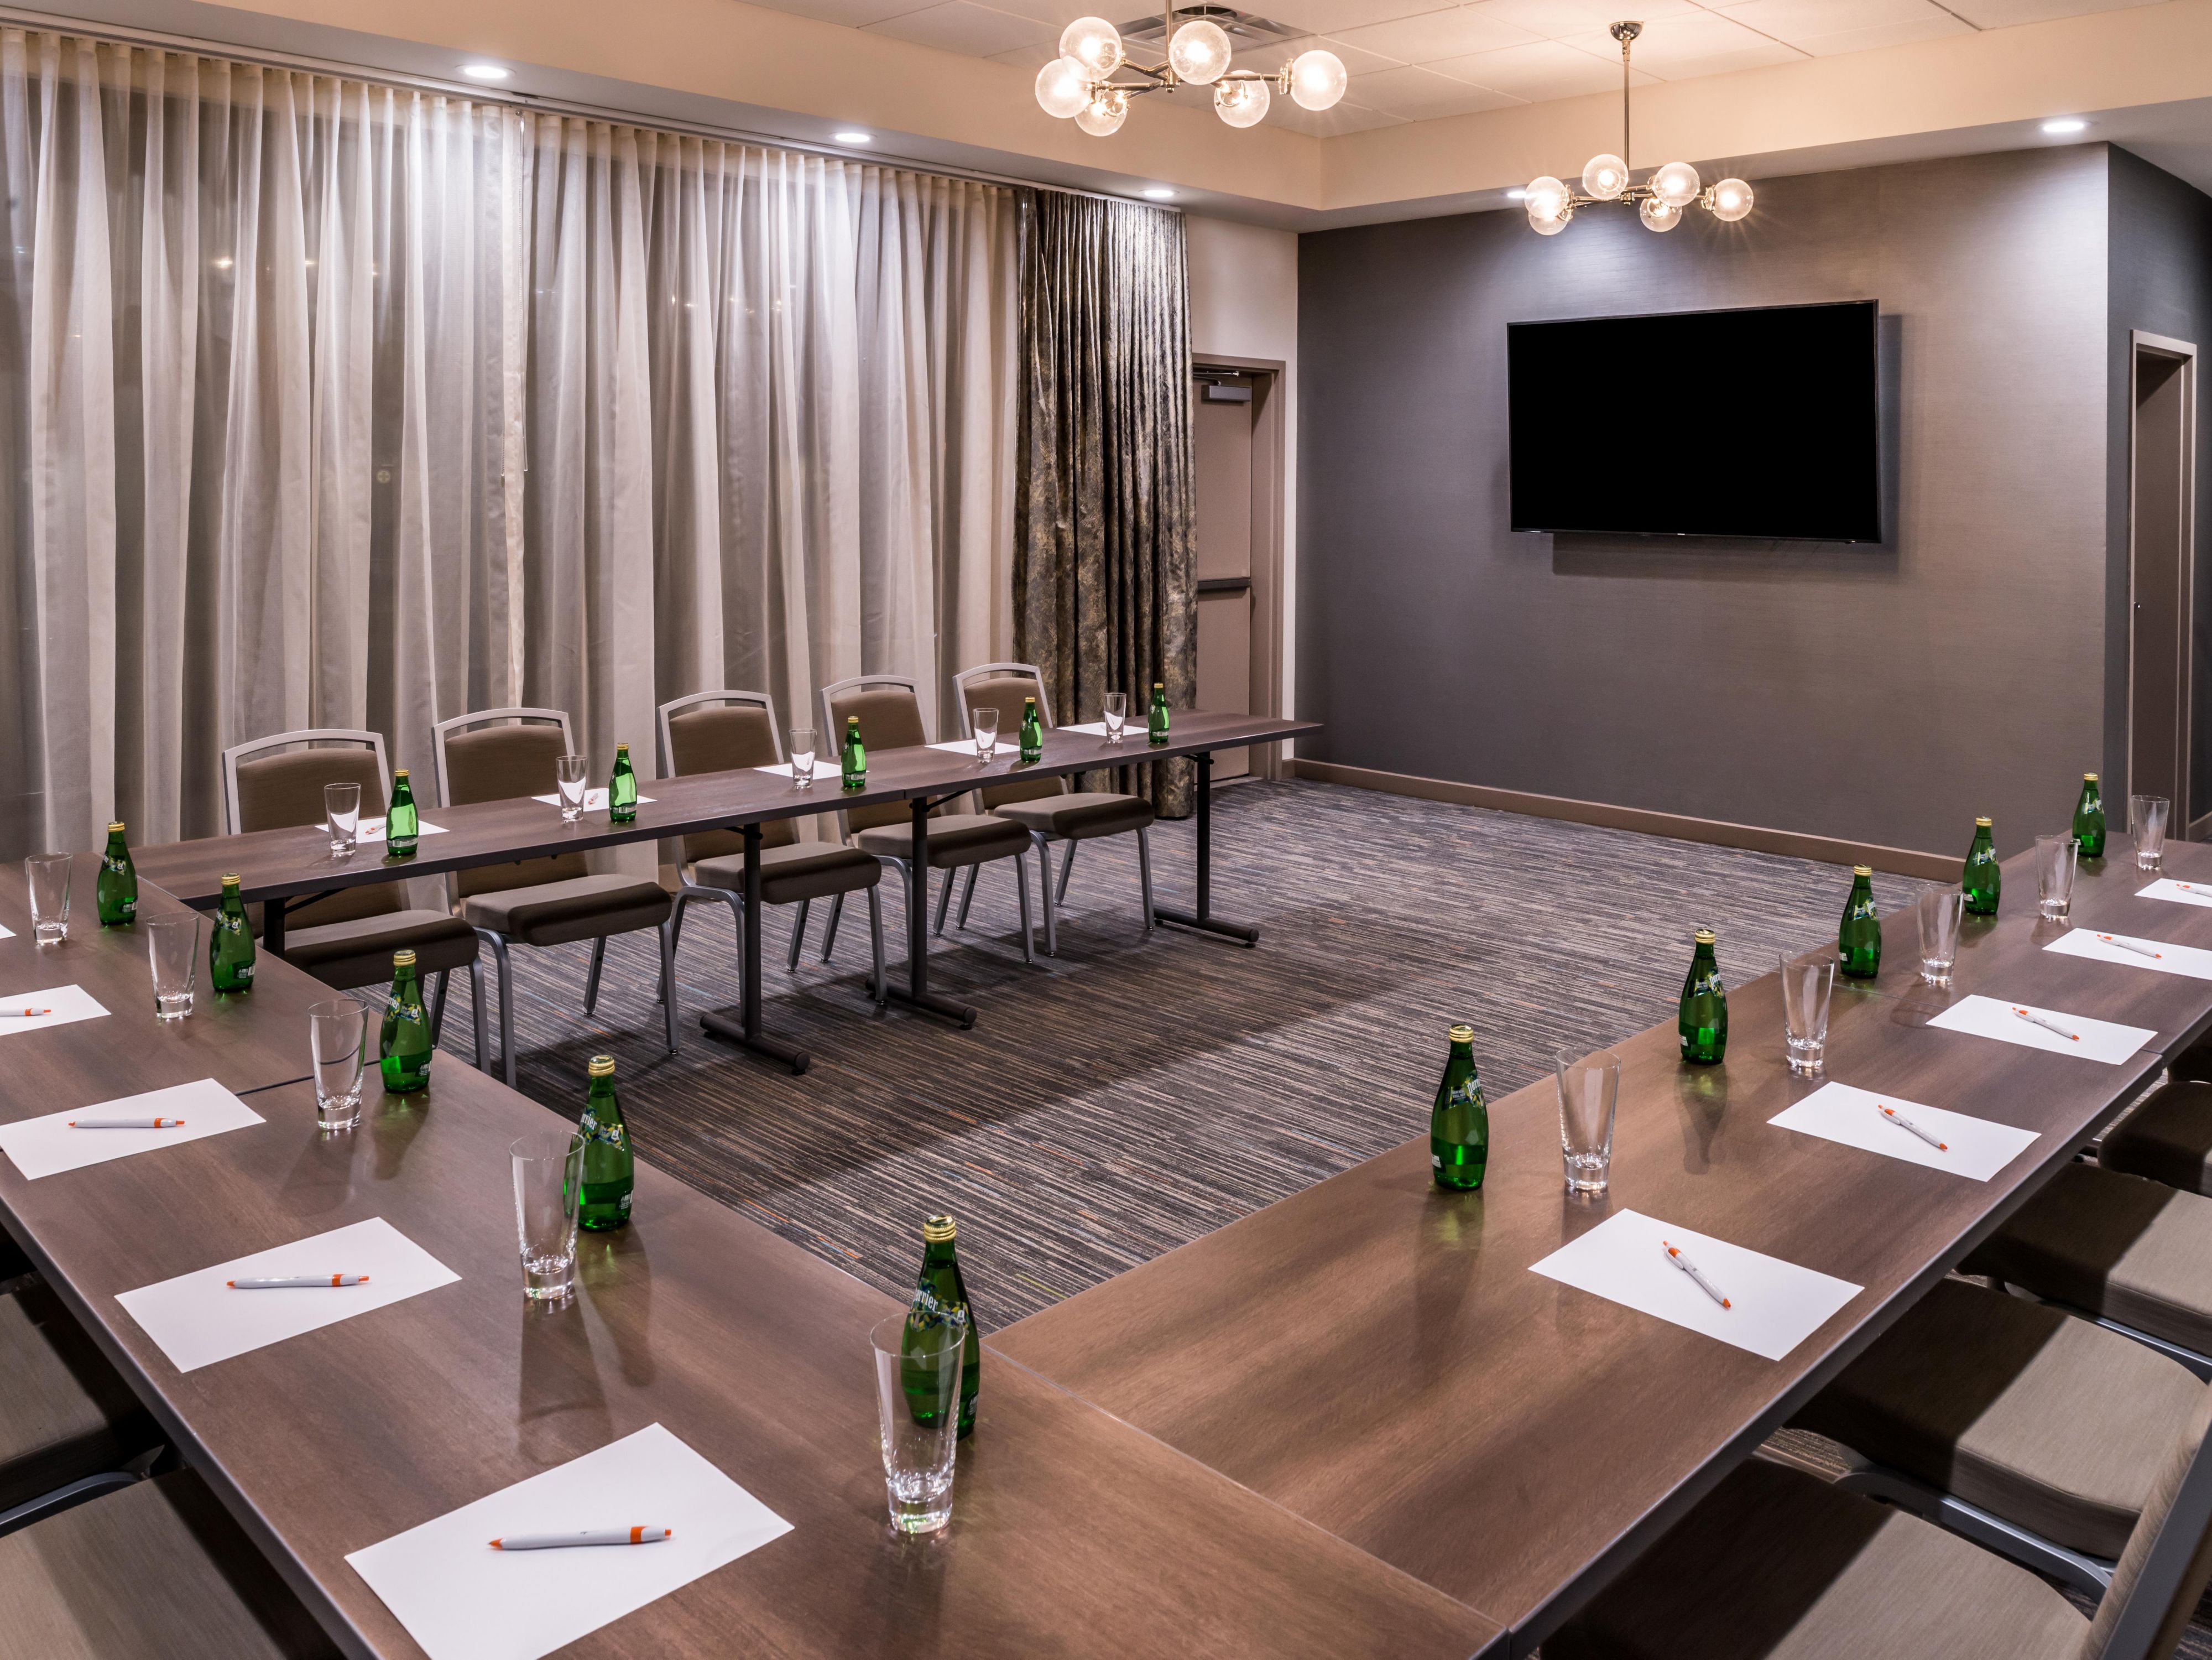 Host a small business meeting or event in Eugene, and take full advantage of in-hotel catering options that can be customized to fit a wide variety of dietary needs. The hotel provides all new furnishings and complimentary high-speed Wi-Fi to ensure a comfortable experience. ​